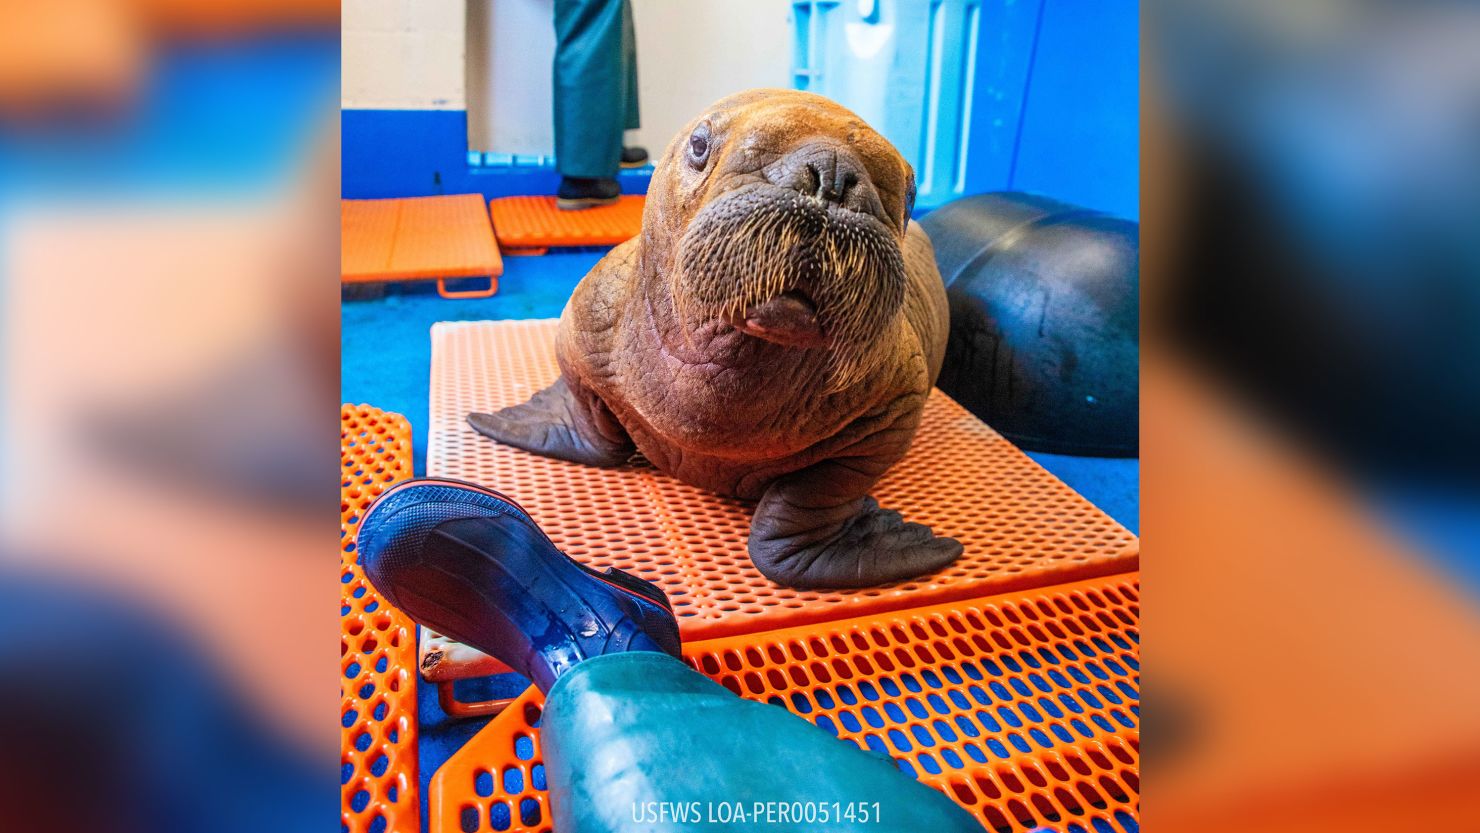 The Pacific walrus calf was estimated to be about a month old when it arrived at the Alaska SeaLife Center.